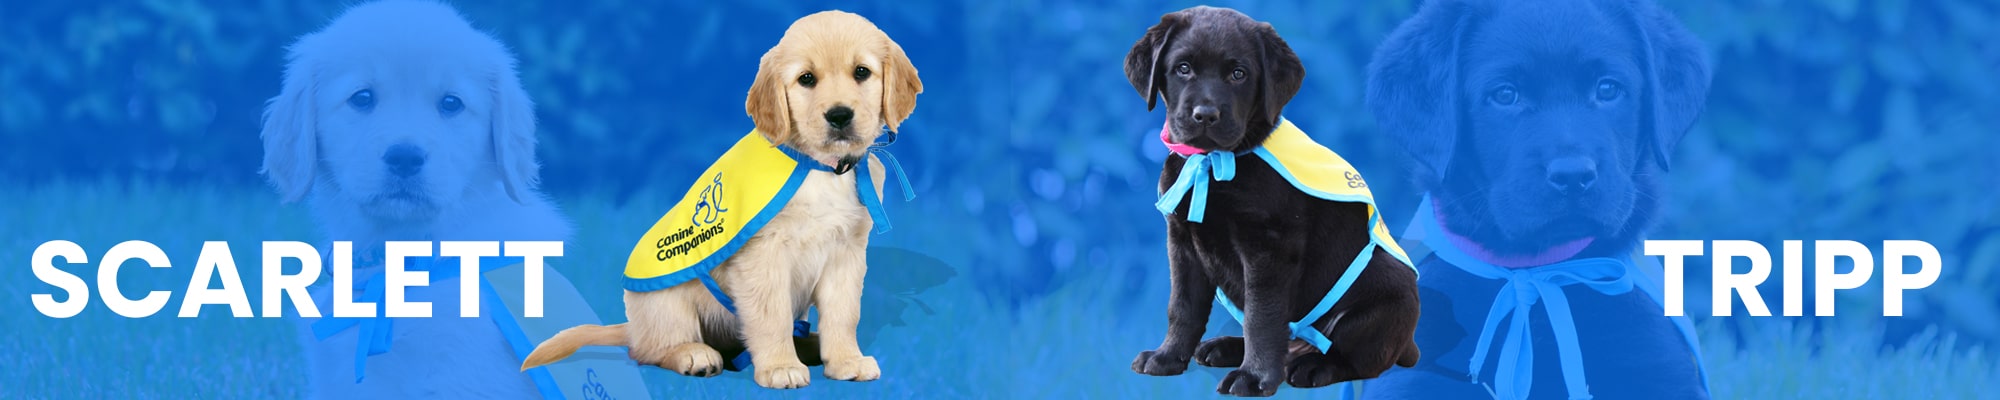 Header image with yellow puppy Scarlett and black puppy Tripp wearing vests.